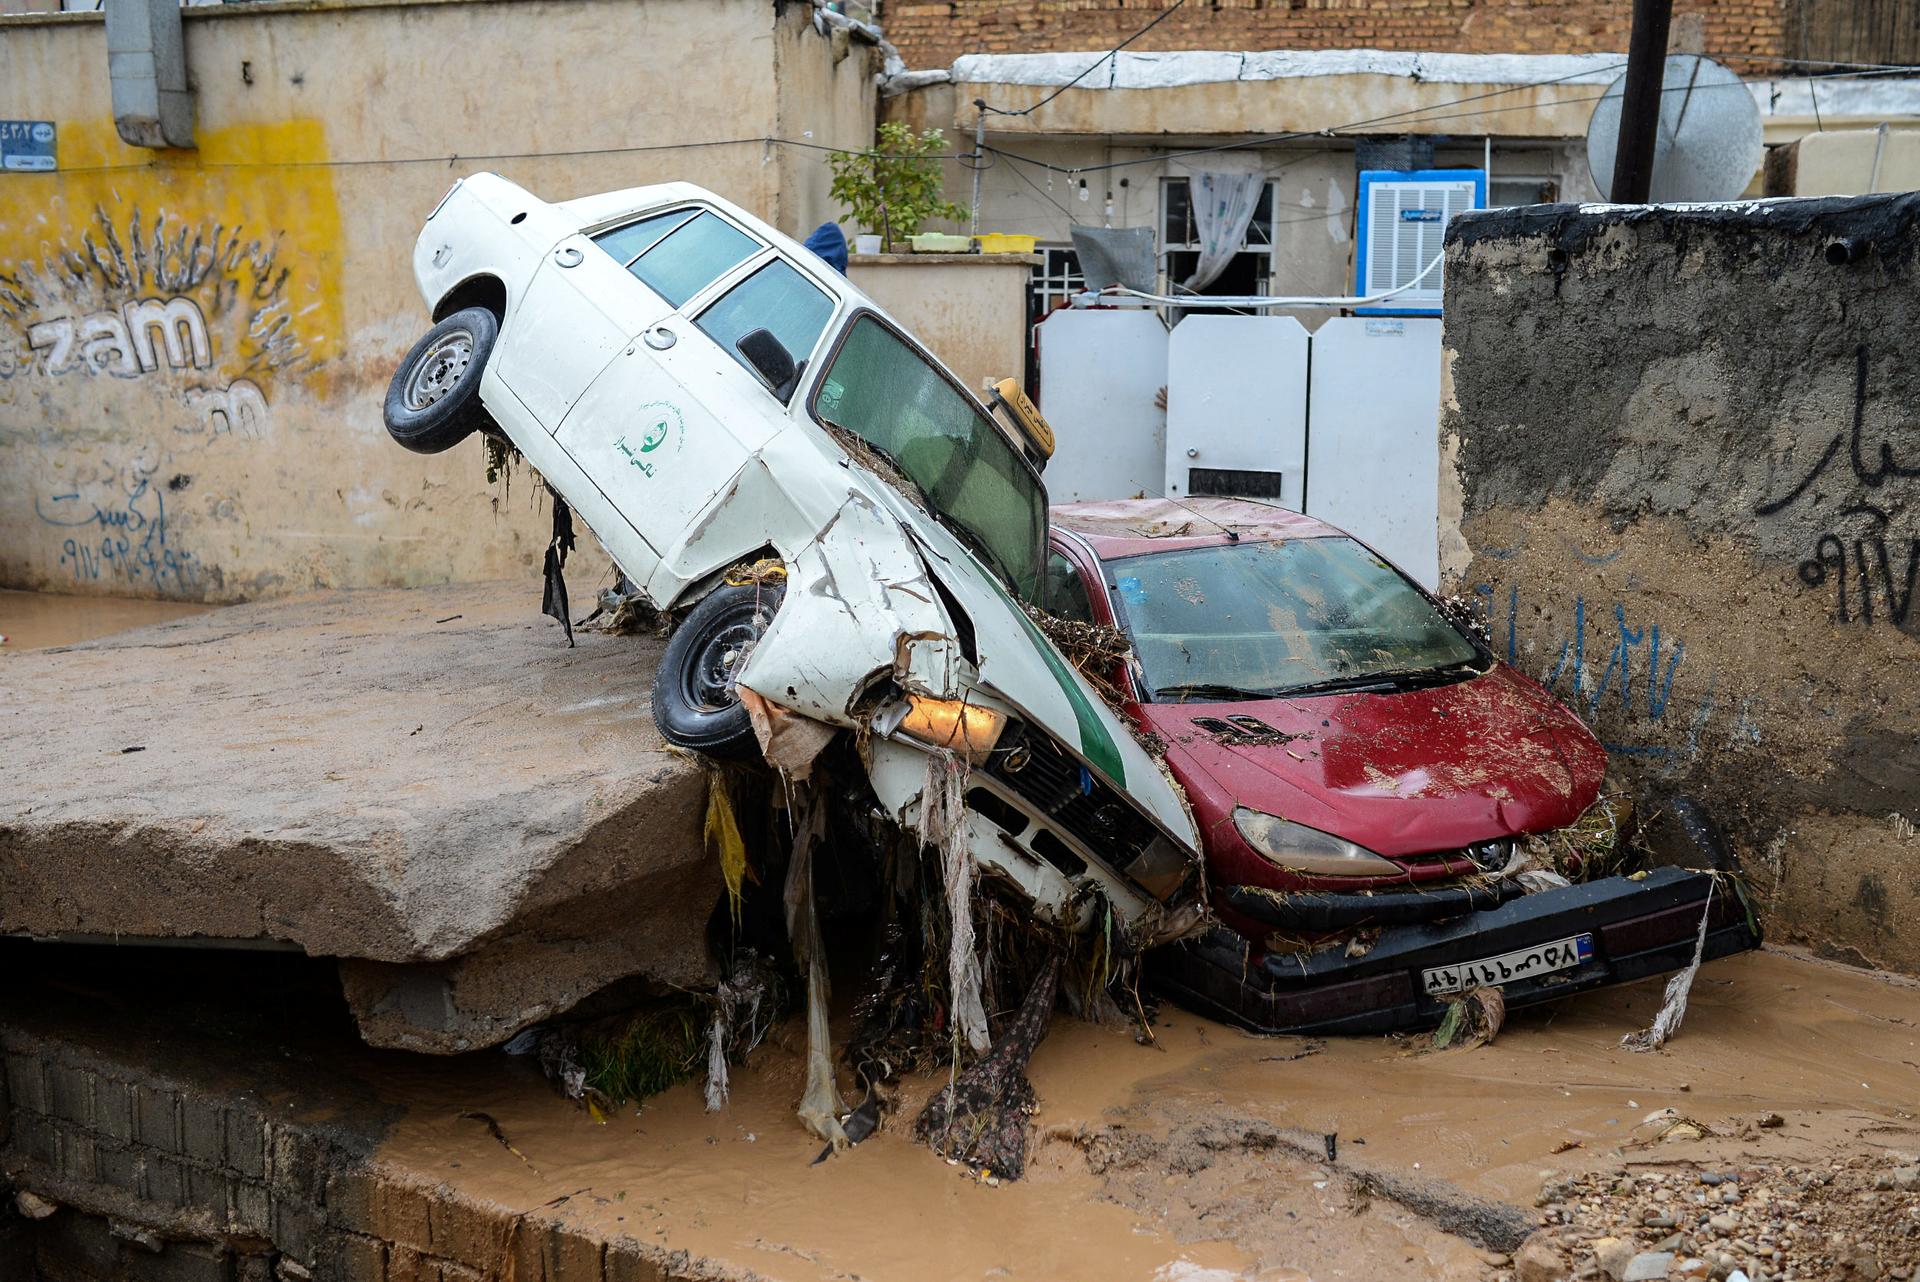 Damaged vehicles are seen after a flash flooding in Shiraz, Iran, March 26, 2019.